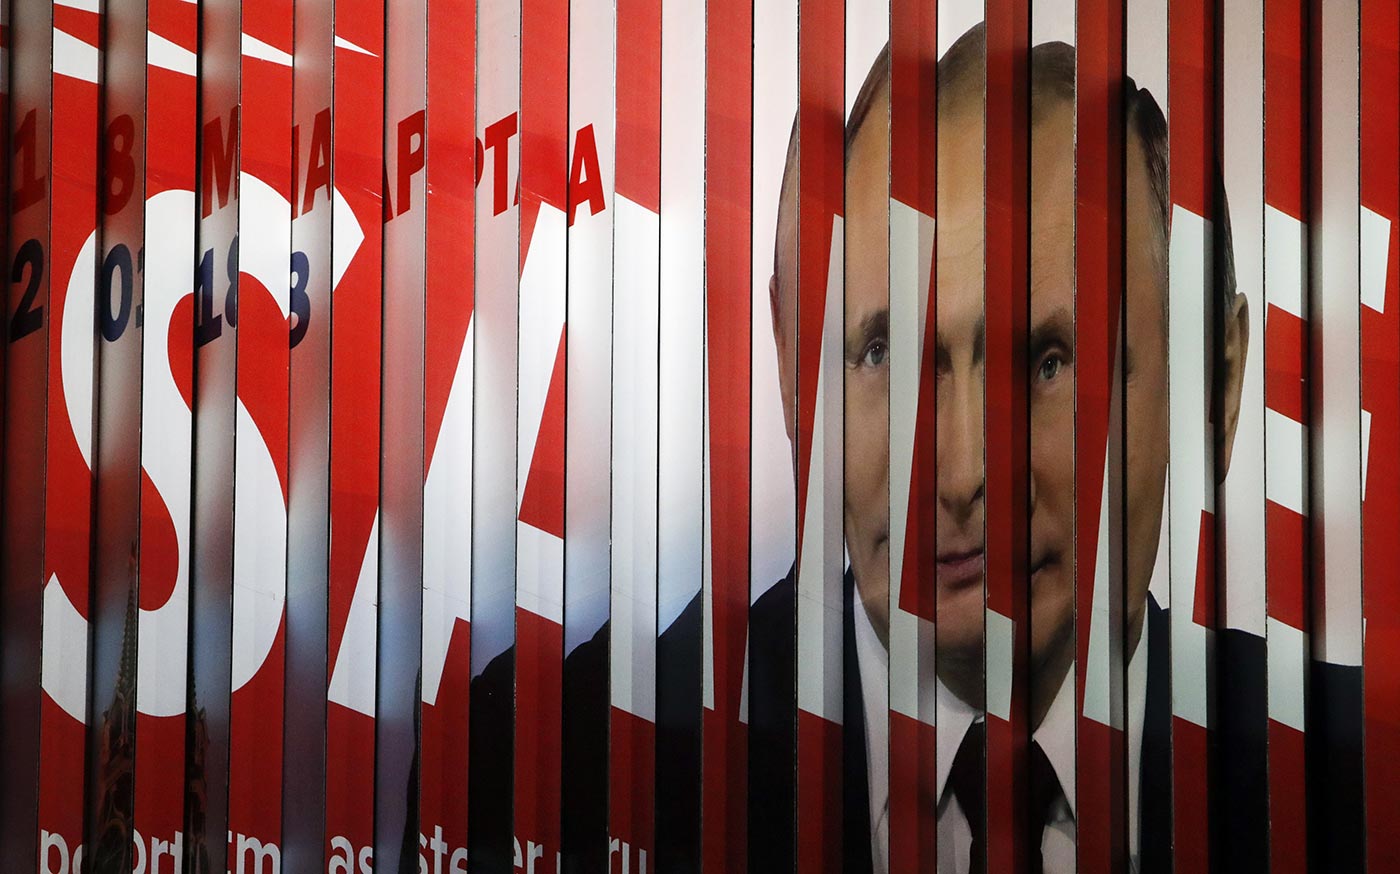 A multi-sided transformable board, which advertises the campaign of Vladimir Putin ahead of the upcoming presidential election,  on display in a street in Moscow, January 2018. Photo (c): REUTERS/Sergei Karpukhin